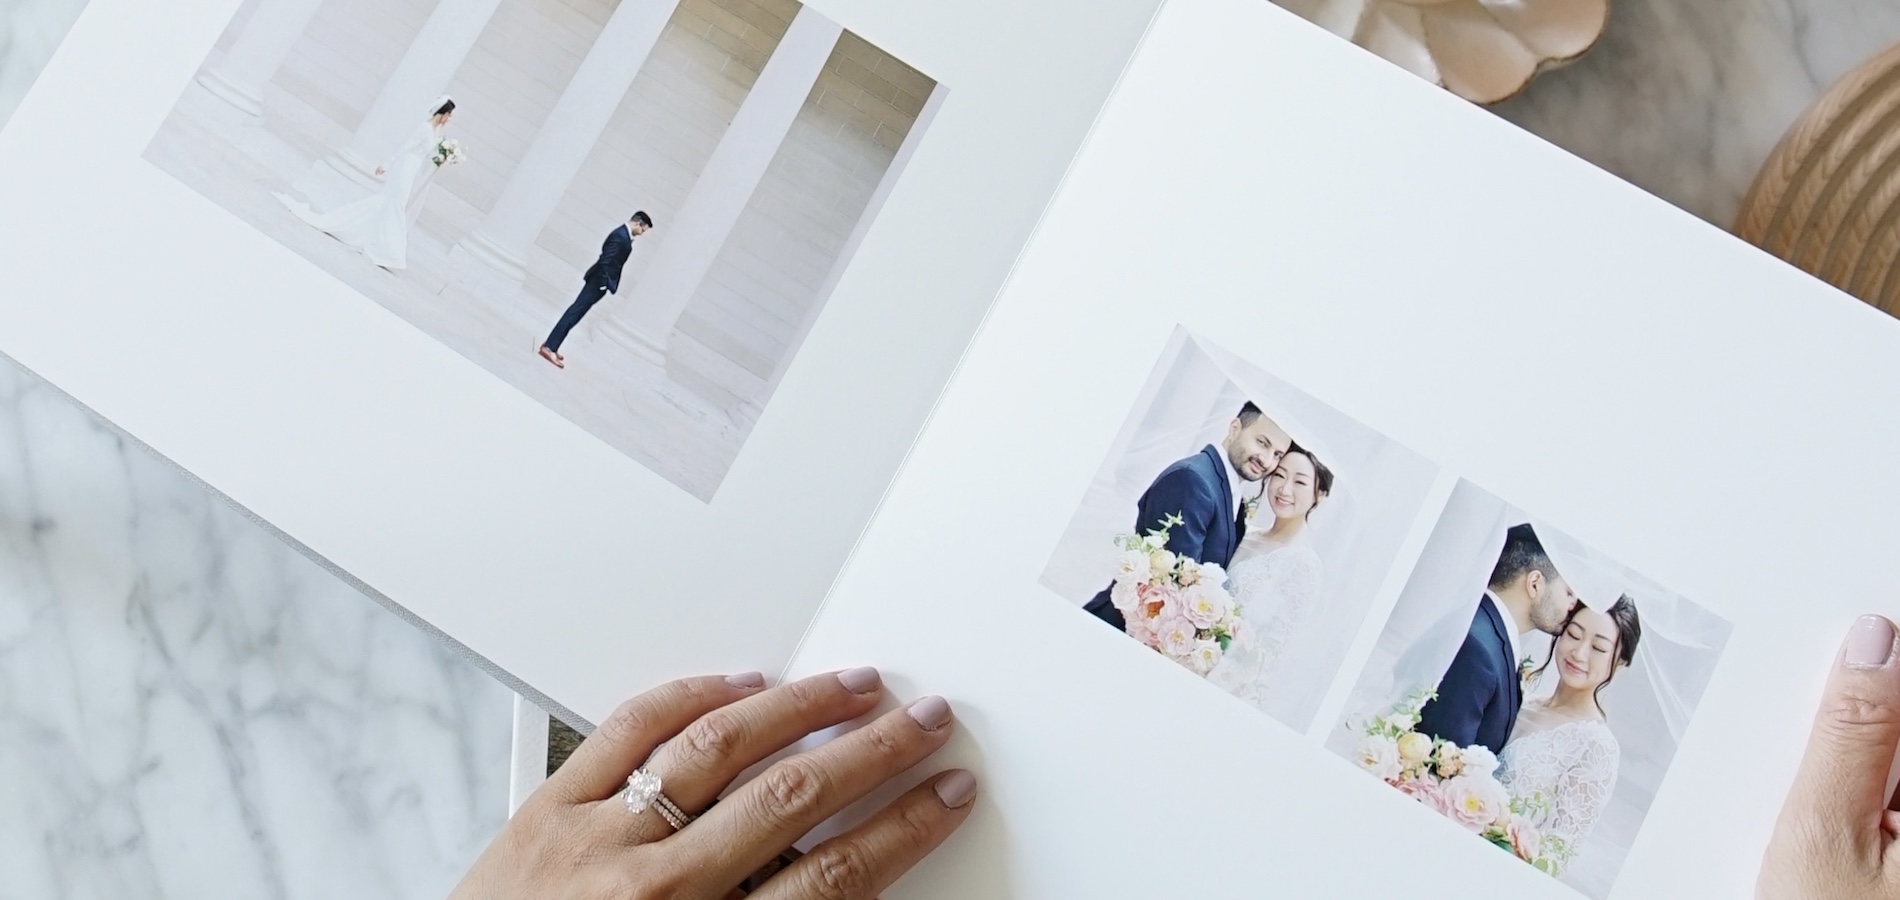 Zoomed in on interior of Artifact Uprising Layflat Photo Album featuring wedding portraits with lots of negative space on page